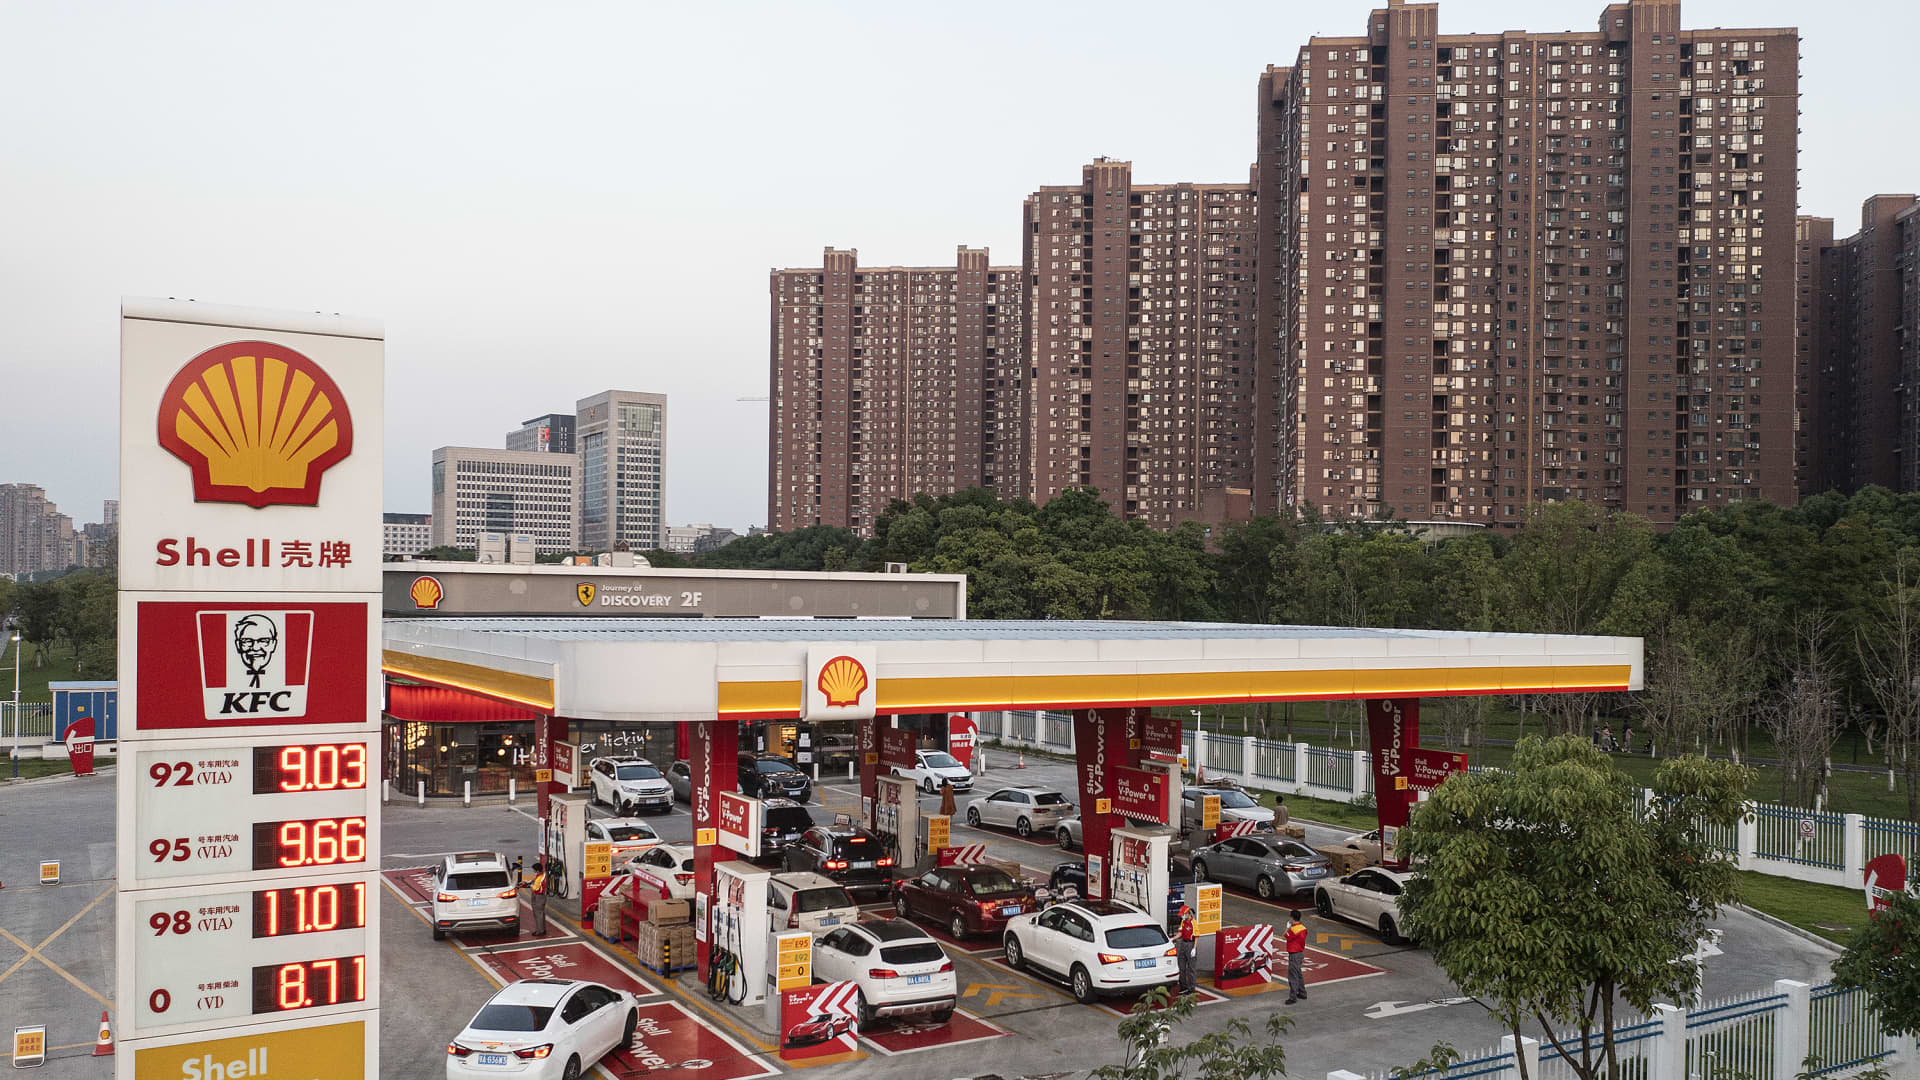 Shell CEO says EV charging stations in China are hot, predicts 'robust' oil and gas demand